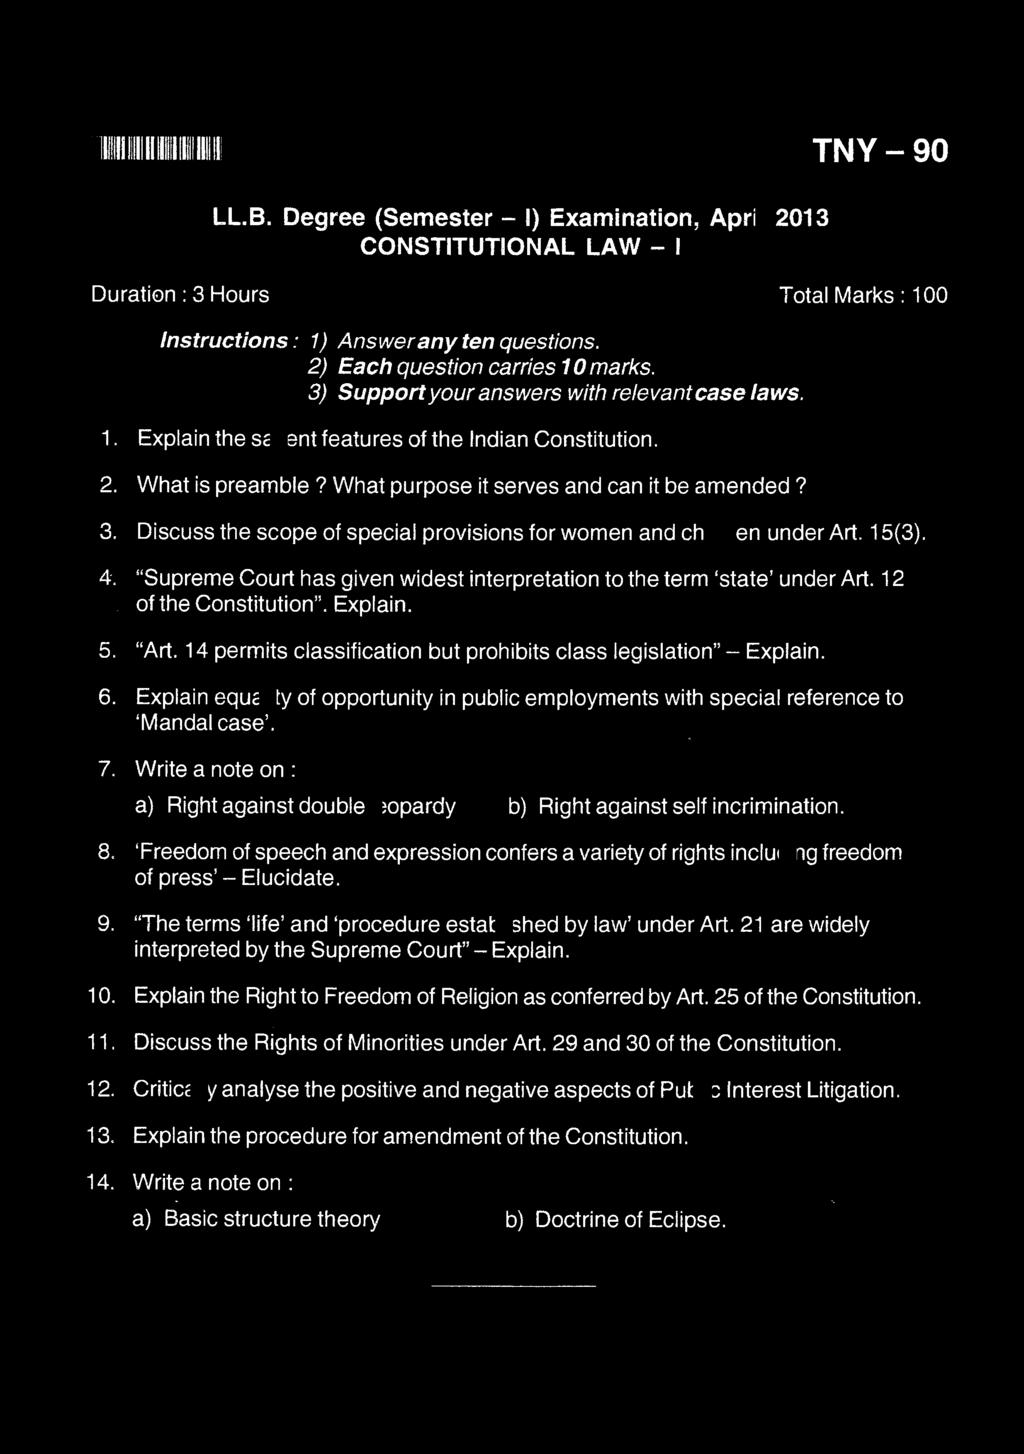 llllllllllllllllllllllltillllllllll TNV-90 LL.B. Degree (Semester - I) Examination, April 2013 CONSTITUTIONAL LAW- I Durati0n: 3 Hours Total Marks: 100 Instructions: 1) Answer any ten questions.